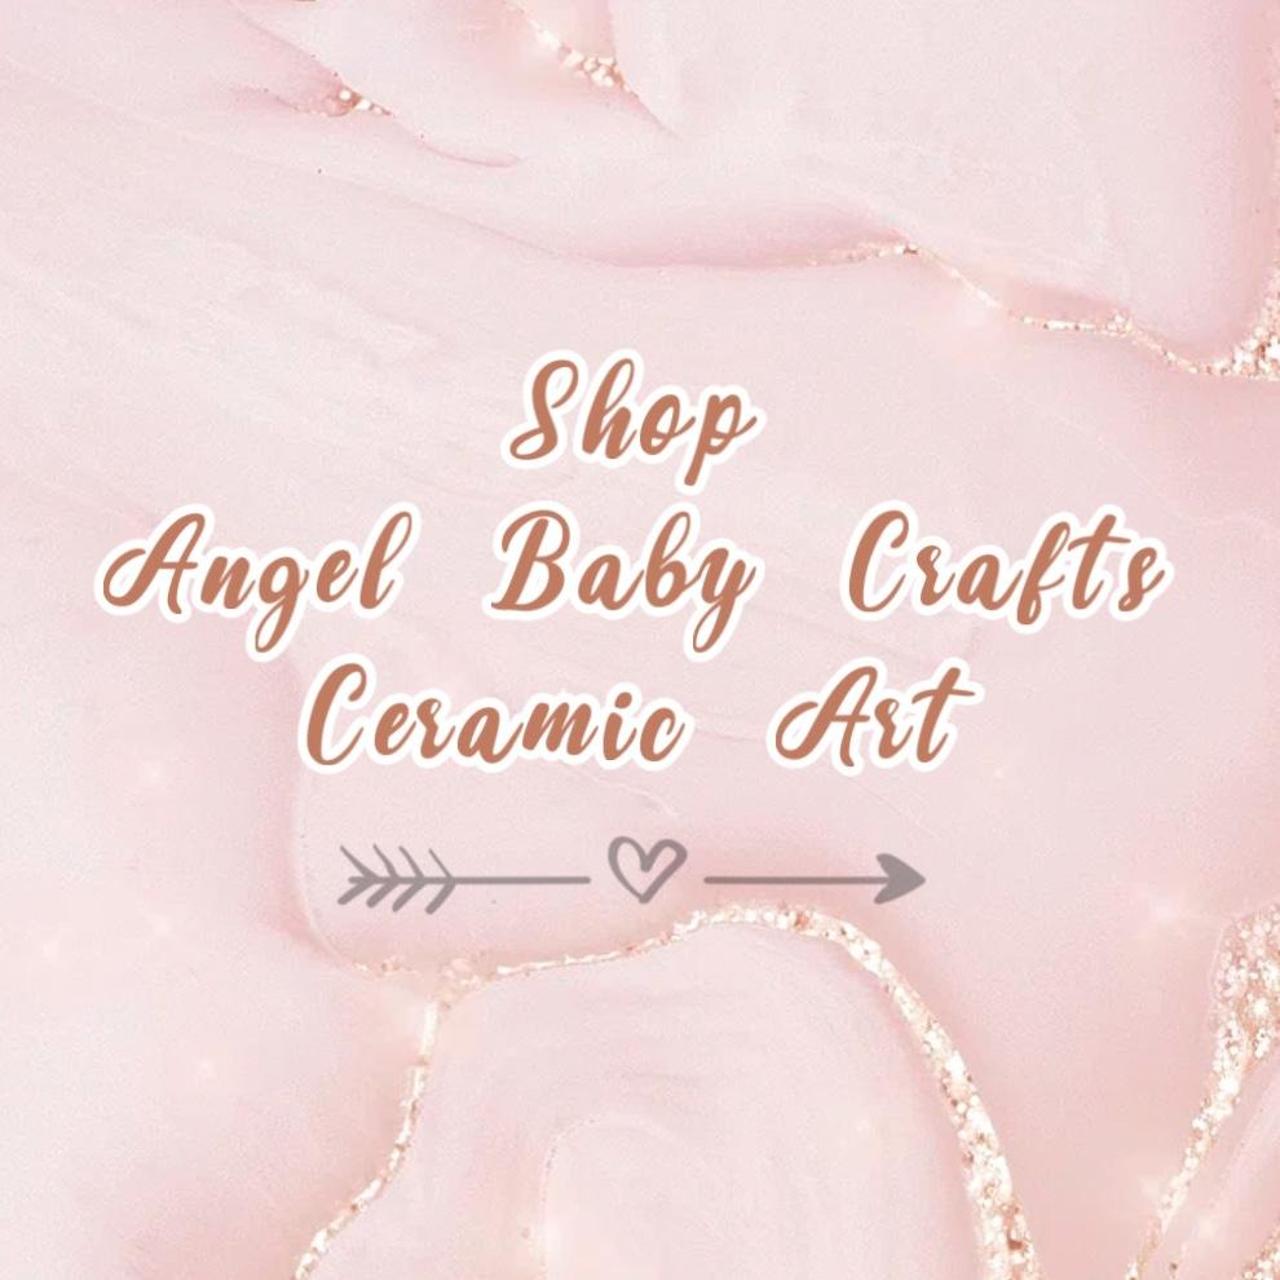 item listed by angelbabycraftsus